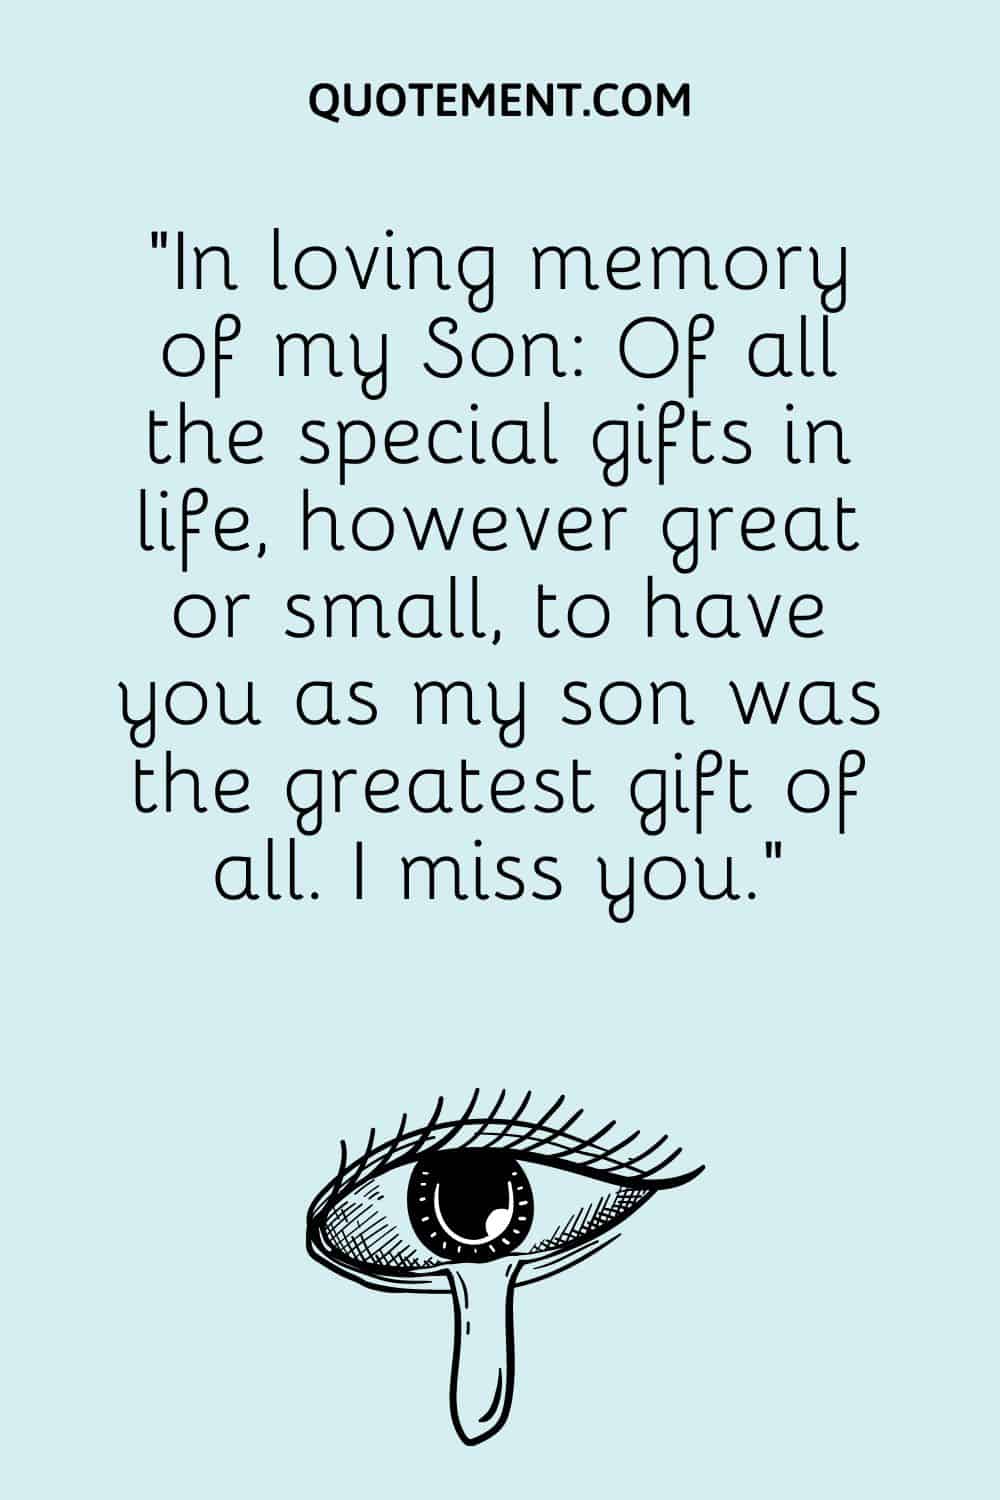 “In loving memory of my Son Of all the special gifts in life, however great or small, to have you as my son was the greatest gift of all. I miss you.”